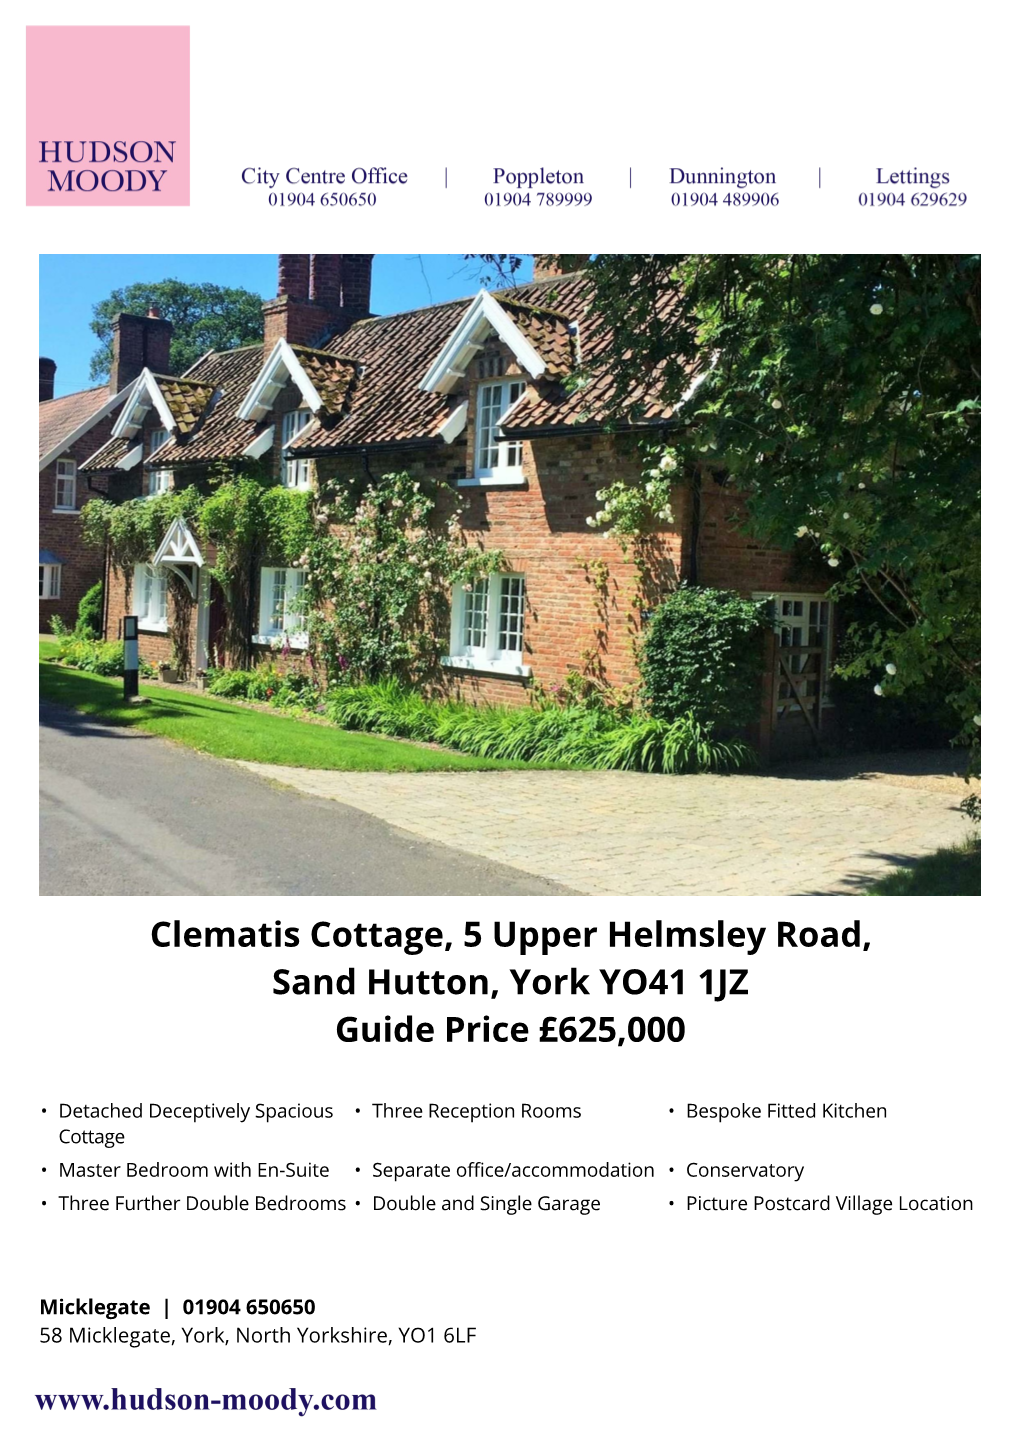 Clematis Cottage, 5 Upper Helmsley Road, Sand Hutton, York YO41 1JZ Guide Price £625,000